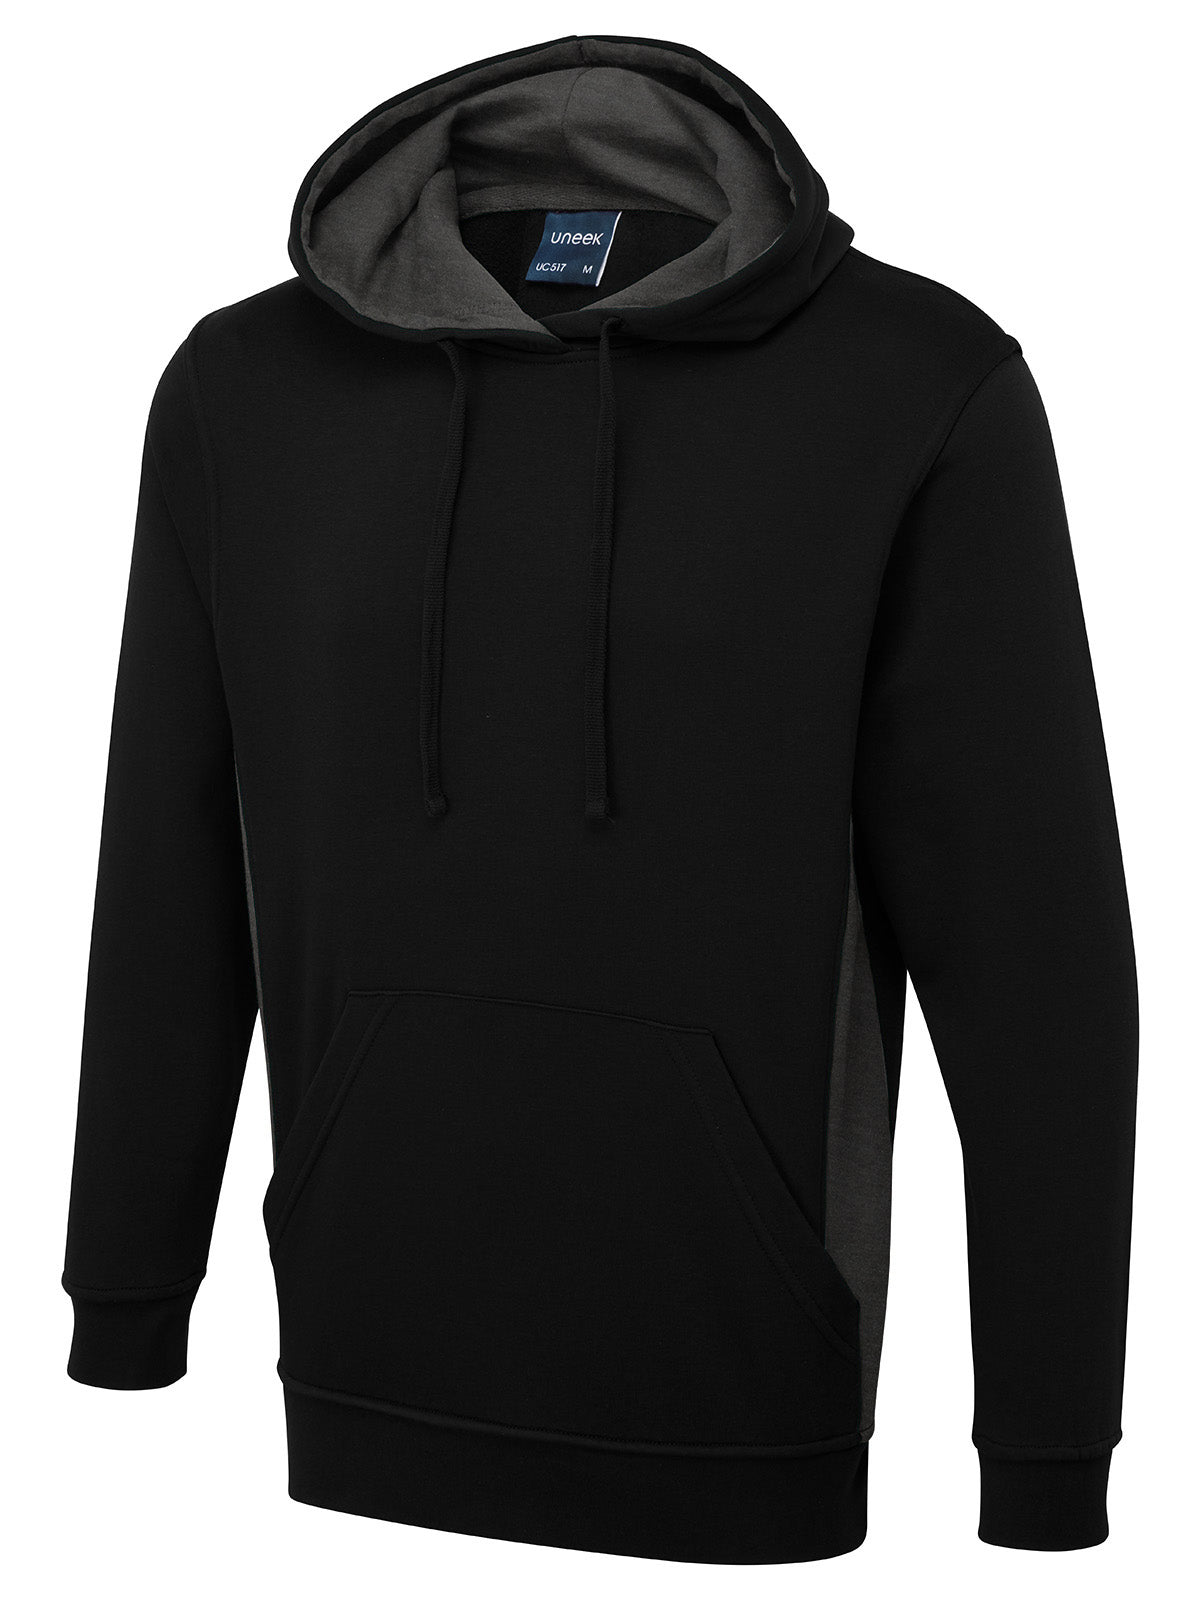 Finsport Renault Cup Unisex Two-Tone Hoodie